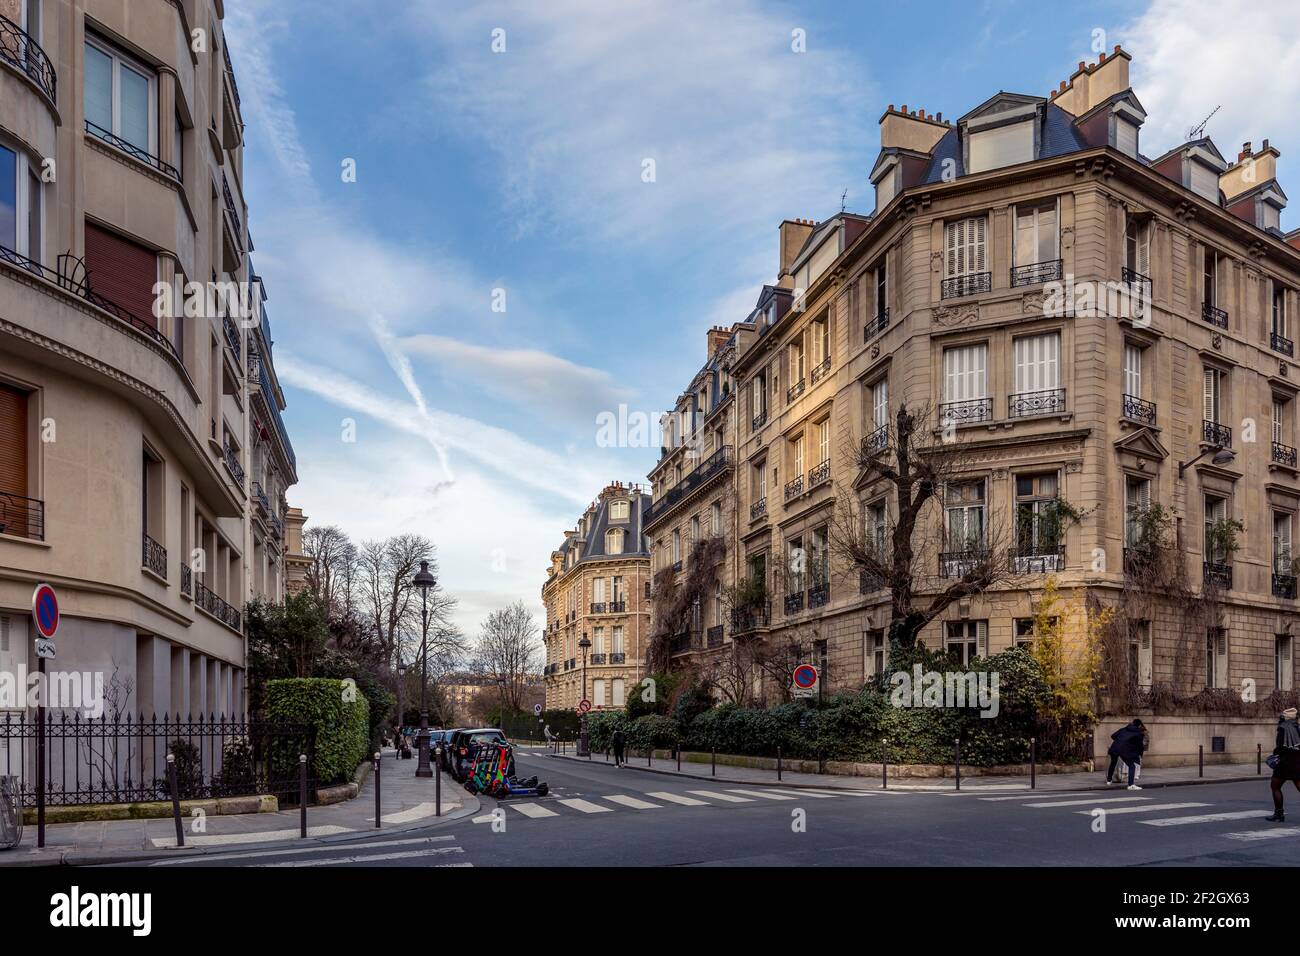 Paris, France - February 19, 2021: Beautiful buildings and typical parisian facades in the 8th district in Paris near parc Monceau Stock Photo